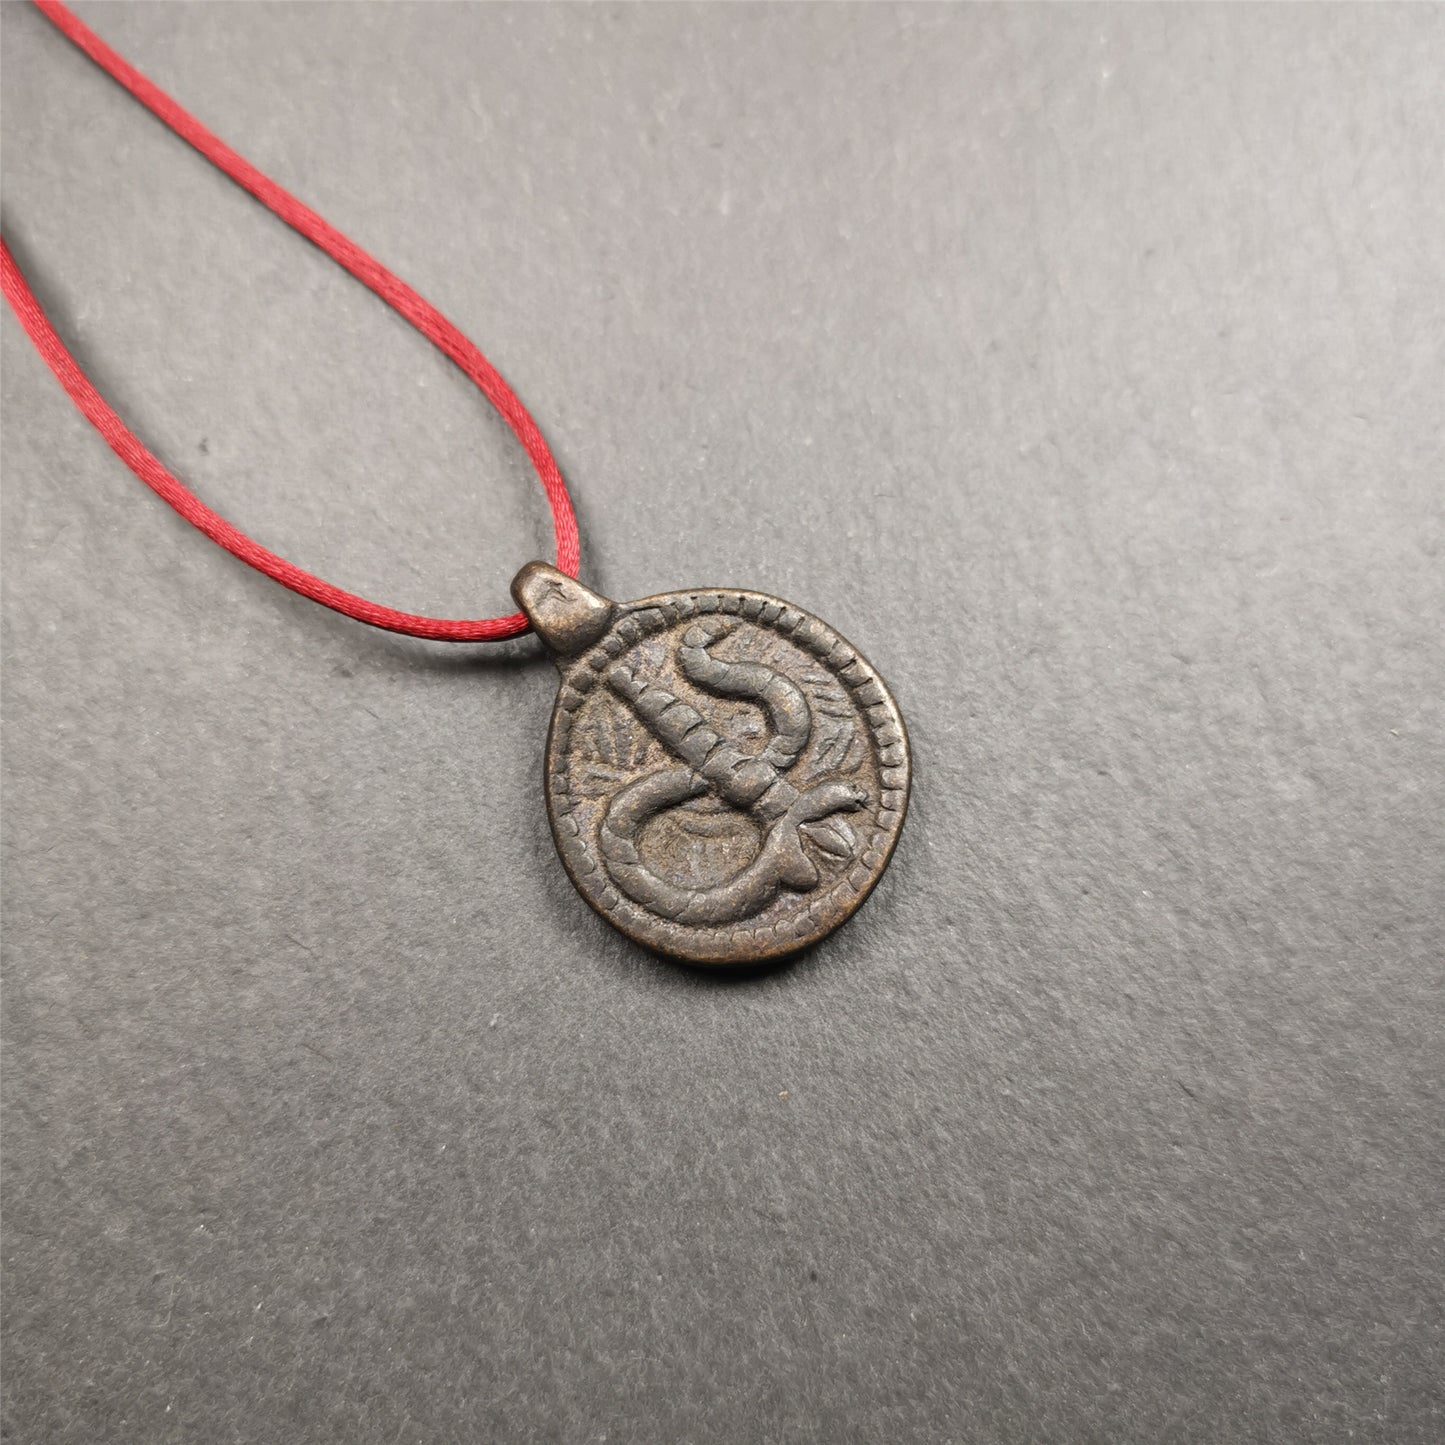 These amulet were  handmade by Tibetan craftsmen from Tibet in 1990's. It's made of copper/brass,brown/yellow color,diameter is 0.83 inch,comes with a leather cord. You can make it into a necklace,or bag hanging